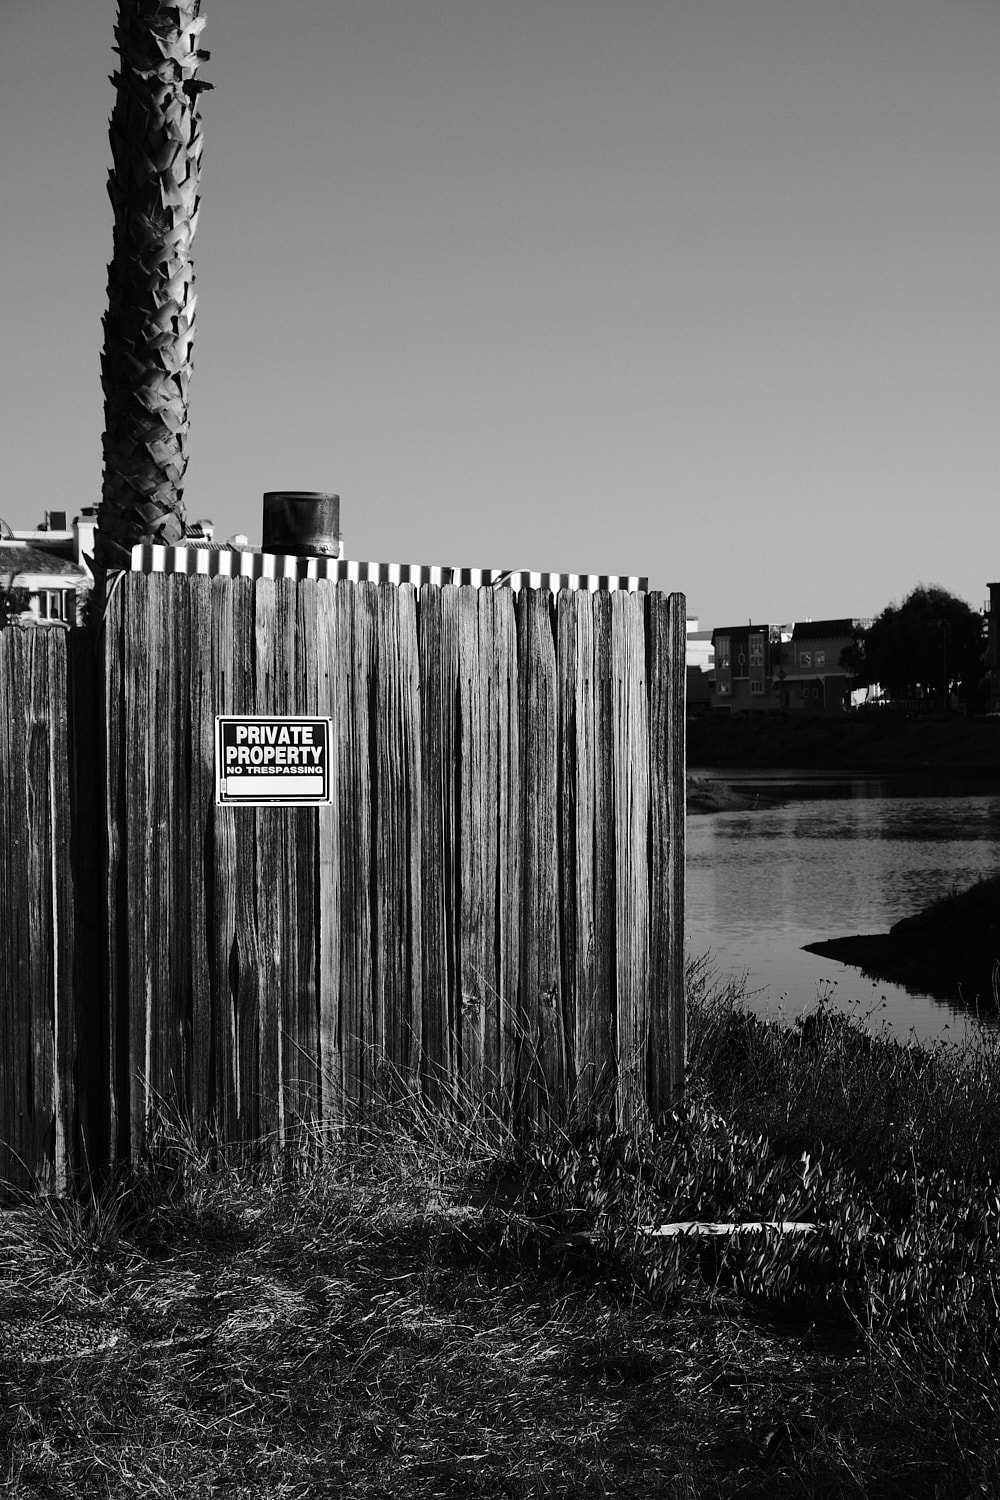 Black and white portrait photo of a fence with a PRIVATE PROPERTY No Tresspassing sign.